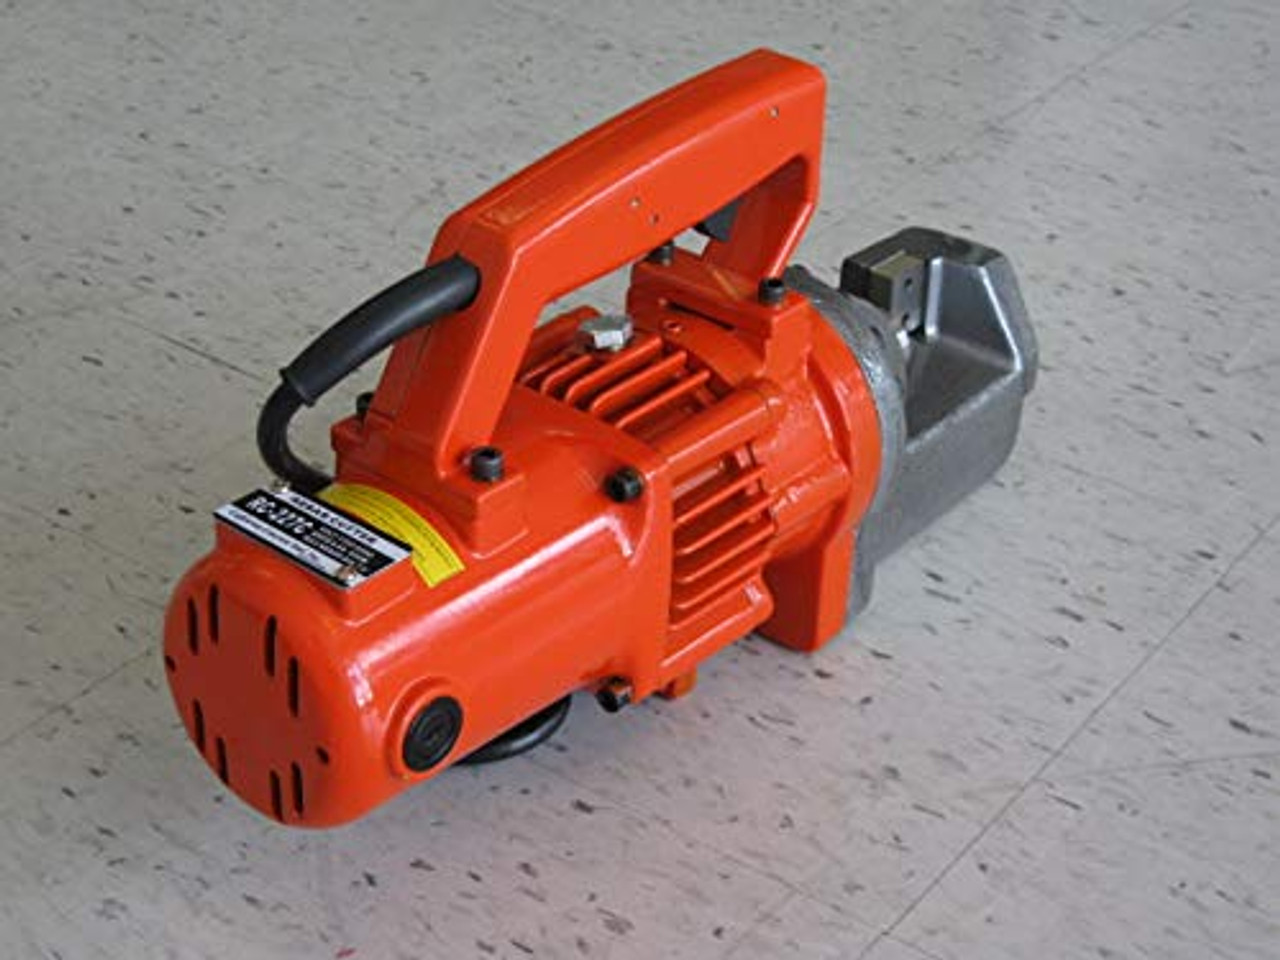 Portable Rebar Cutter Electric Hydraulic Cut Up to #5 5/8